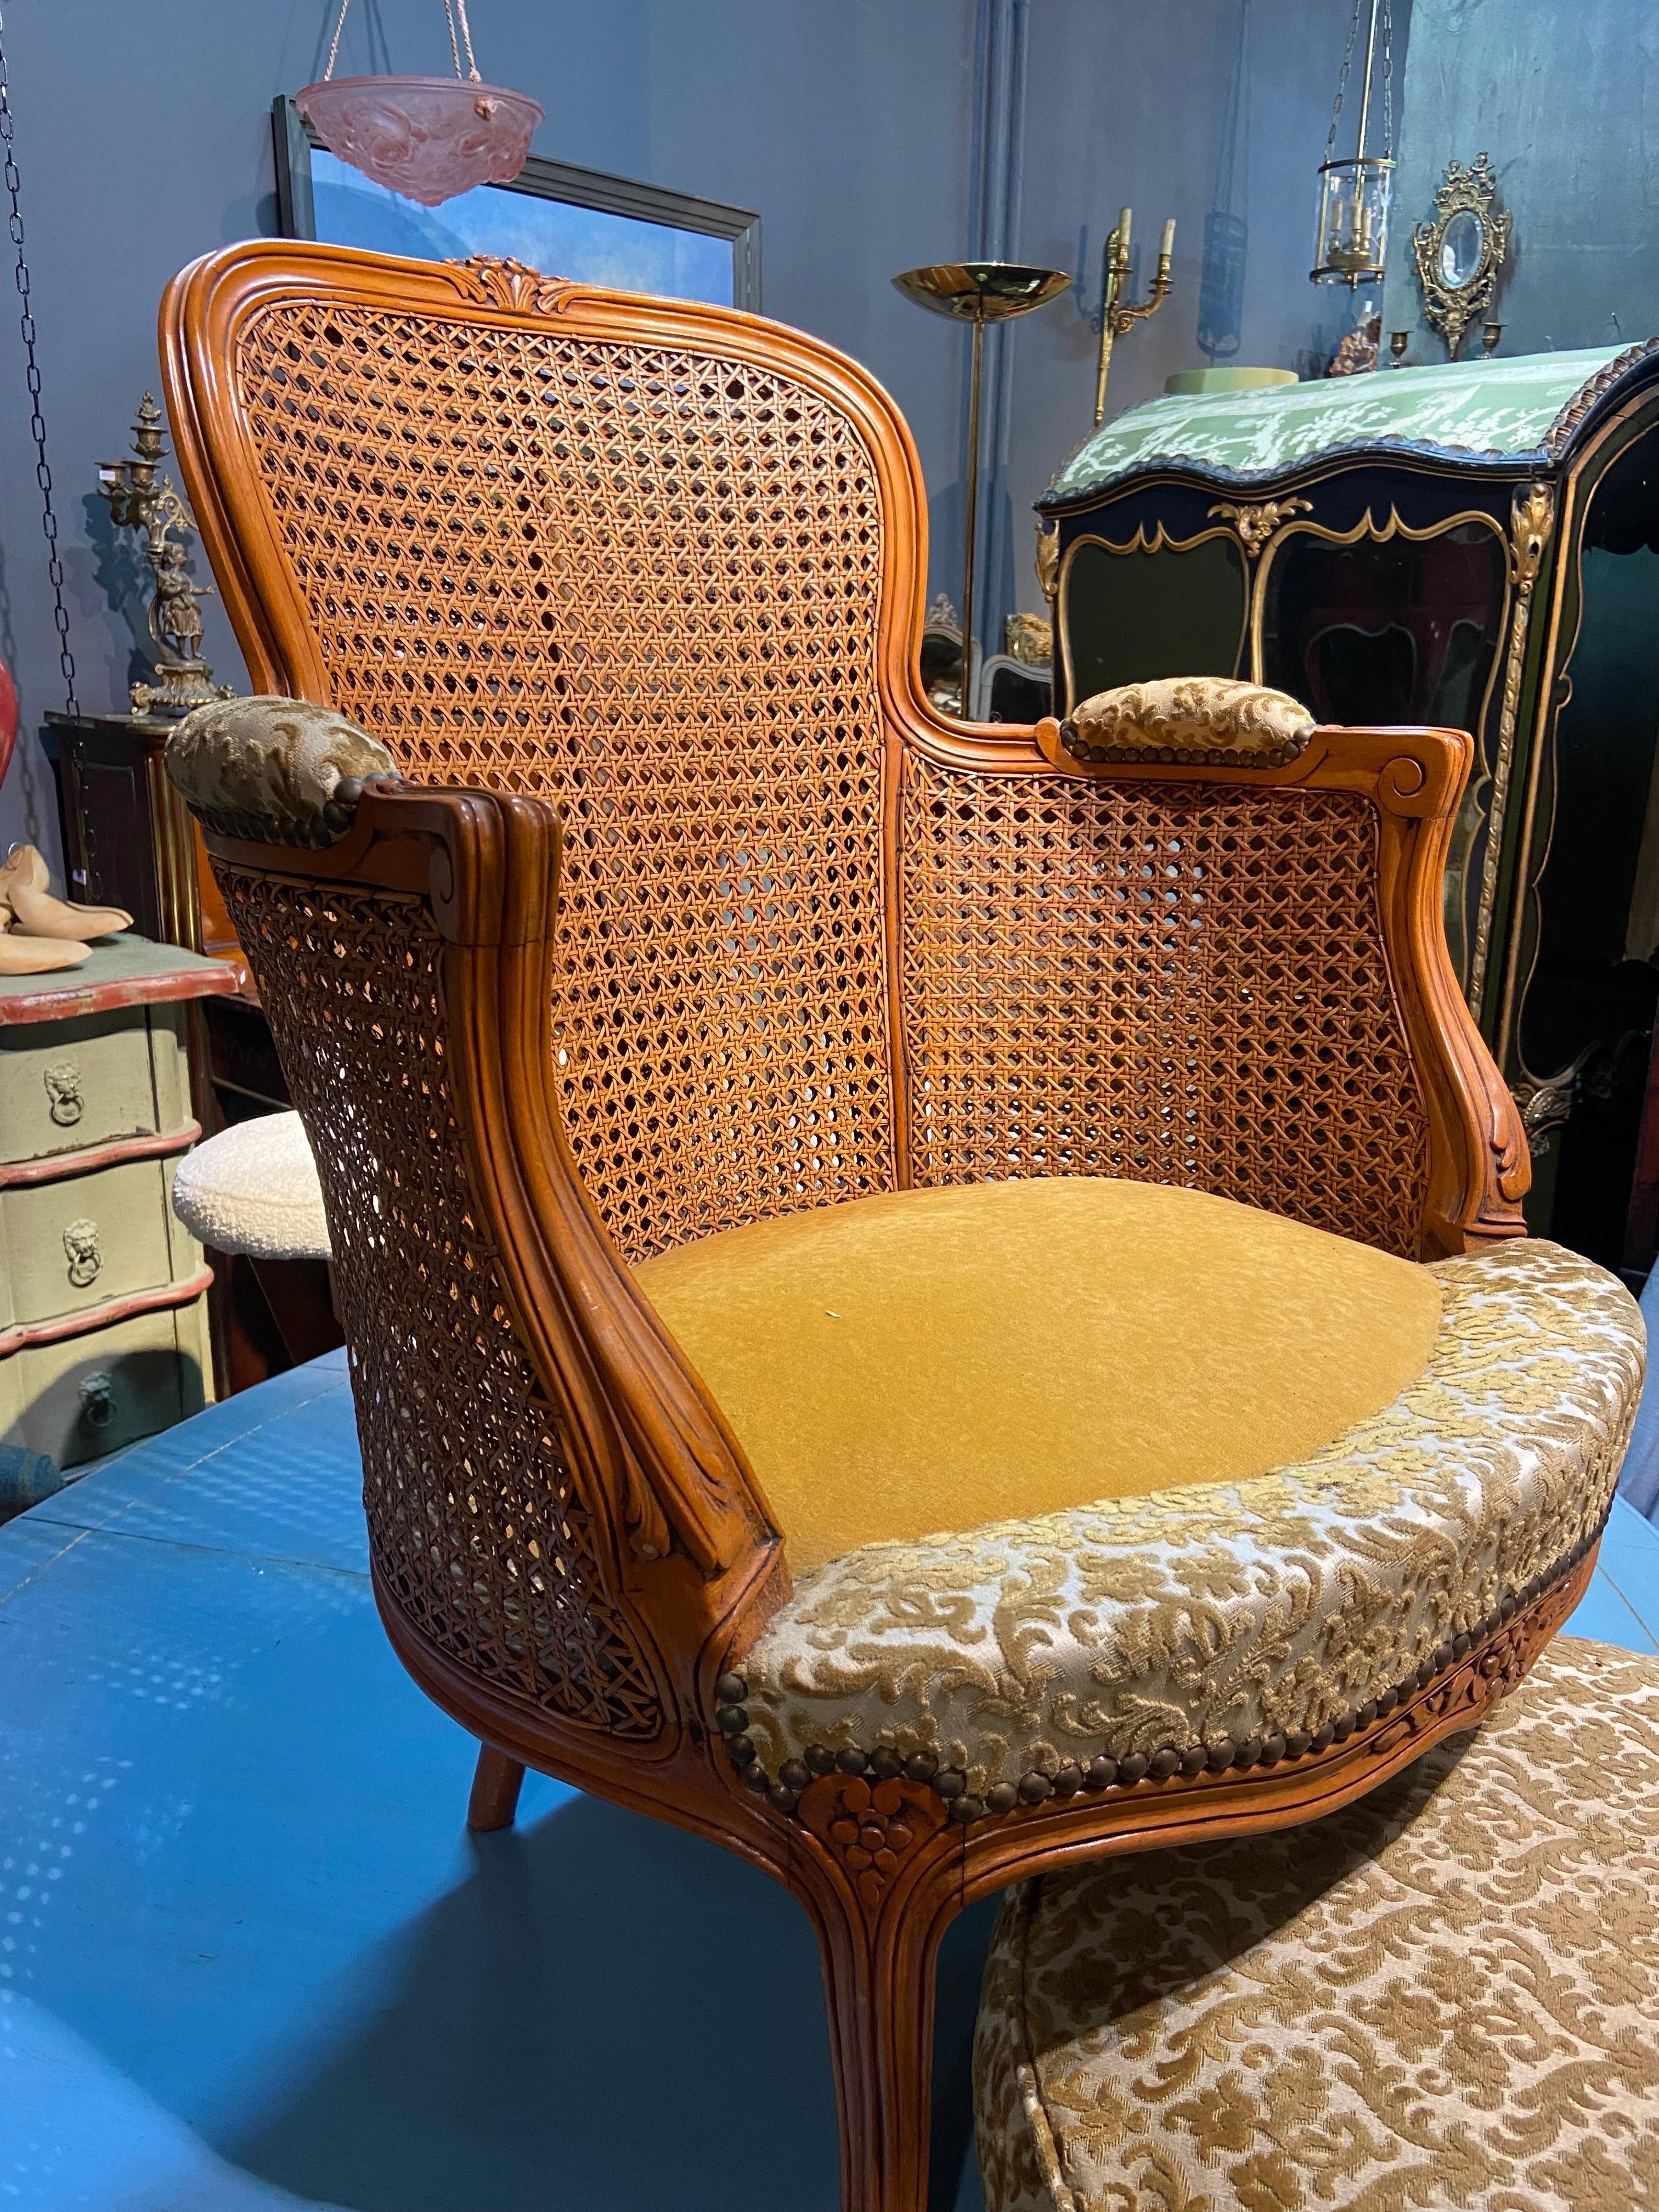 19th Century French Round Bergere Chair in Hand Carved Walnut Wood with Cane In Good Condition For Sale In Sofia, BG